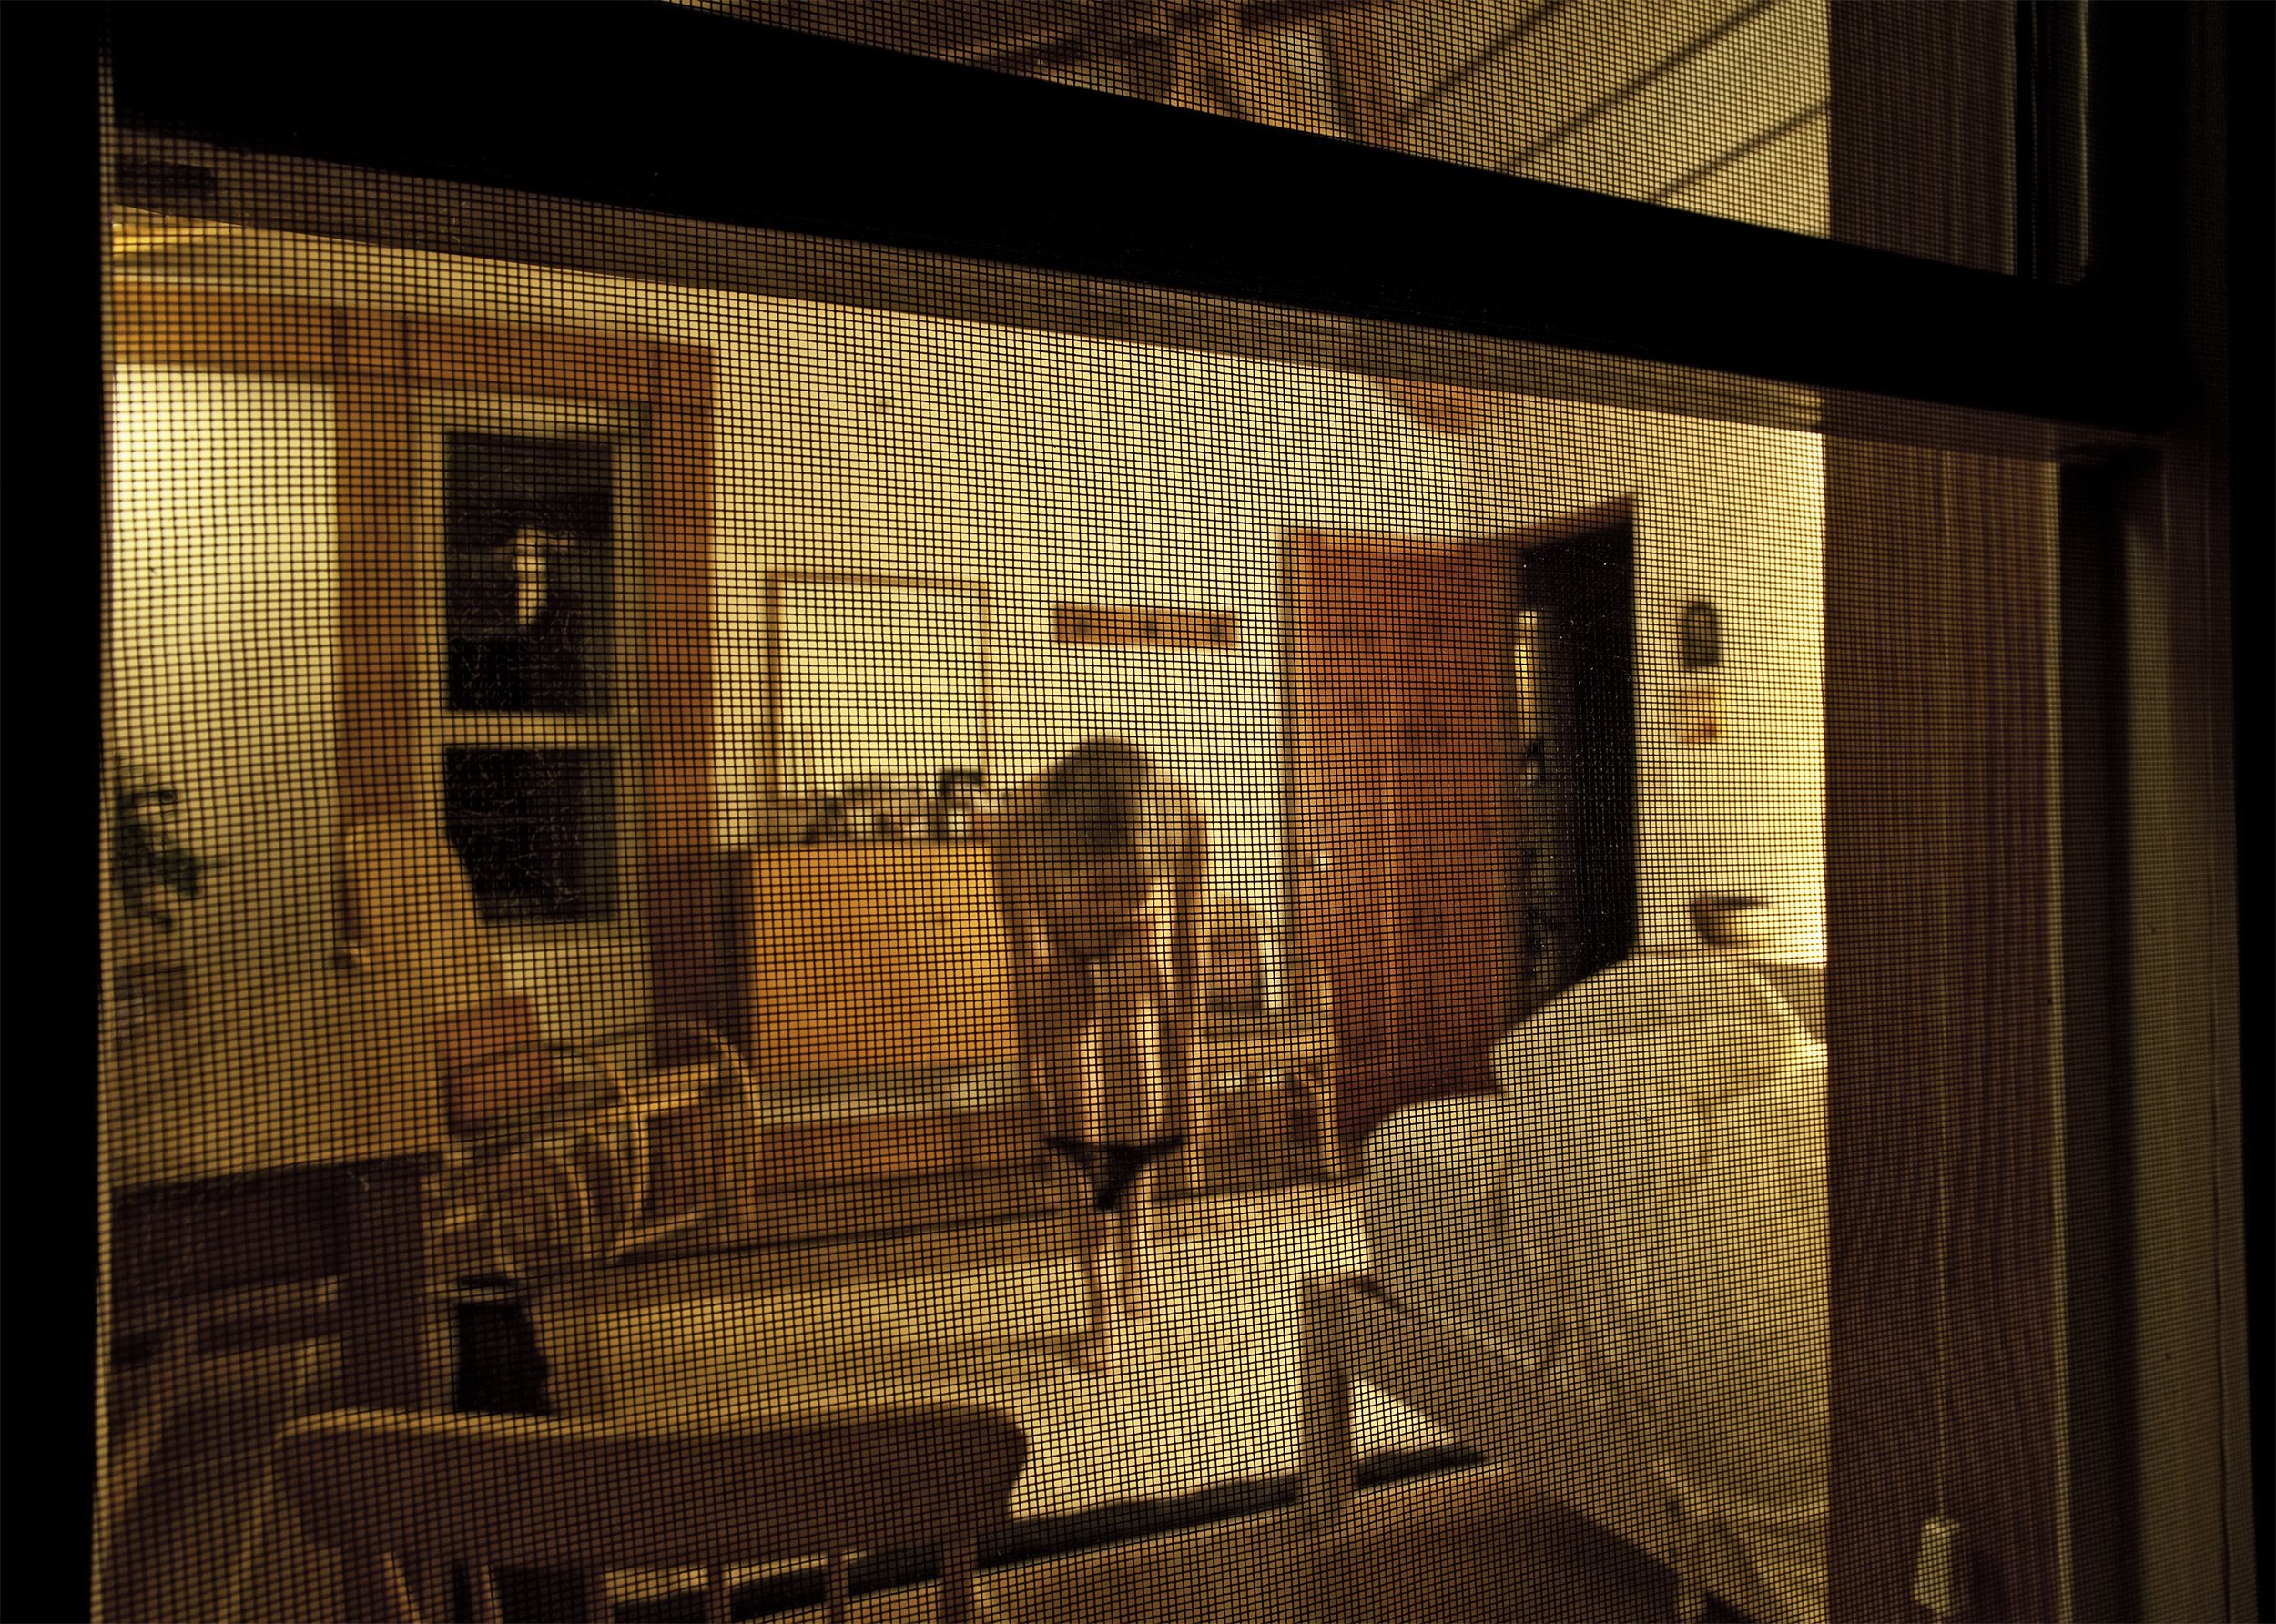  Marna Clarke,  Peeping Tom , 2011, archival digital print, courtesy and copyright of the artist. 